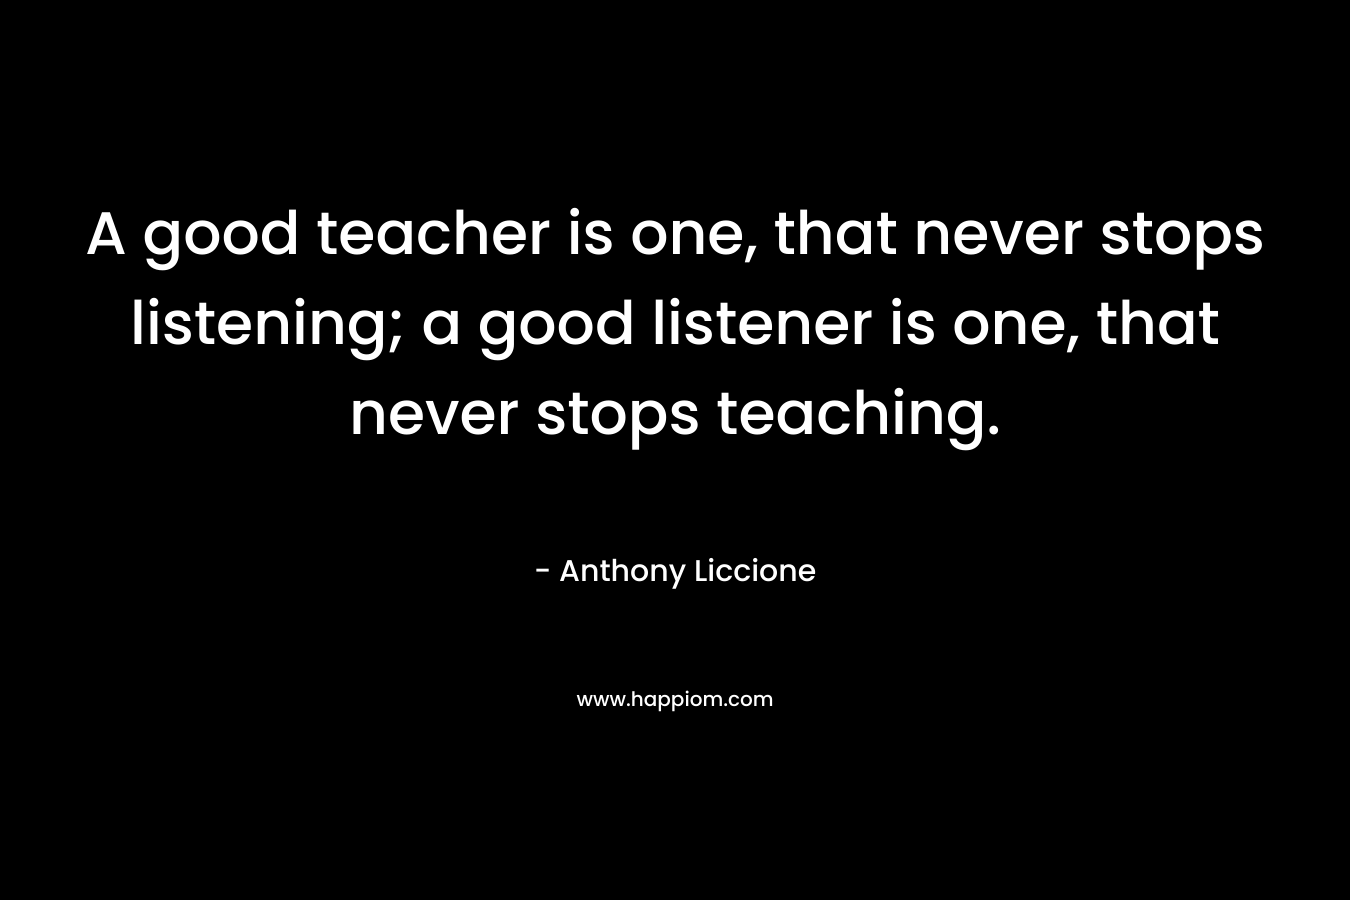 A good teacher is one, that never stops listening; a good listener is one, that never stops teaching.